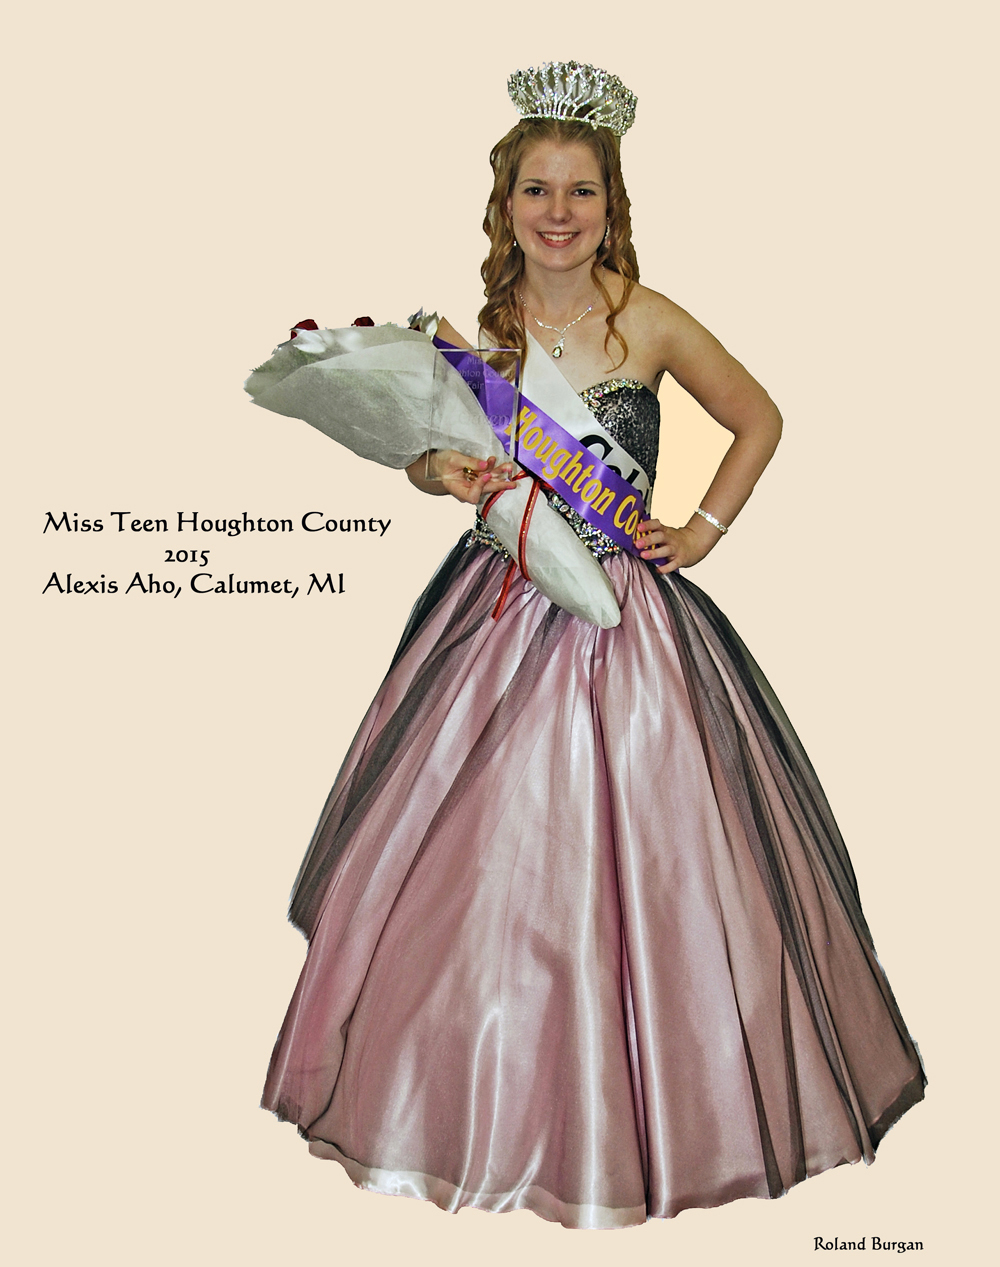 The Miss Teen Houghton County Queen Pageant was as usual held on opening evening, in the Main Indoor Arena. Chosen by a panel of three judges, was Alexis Aho, 16, of Calumet, a High School junior. Her parents are Stephanie and Tim Booth, of Calumet.